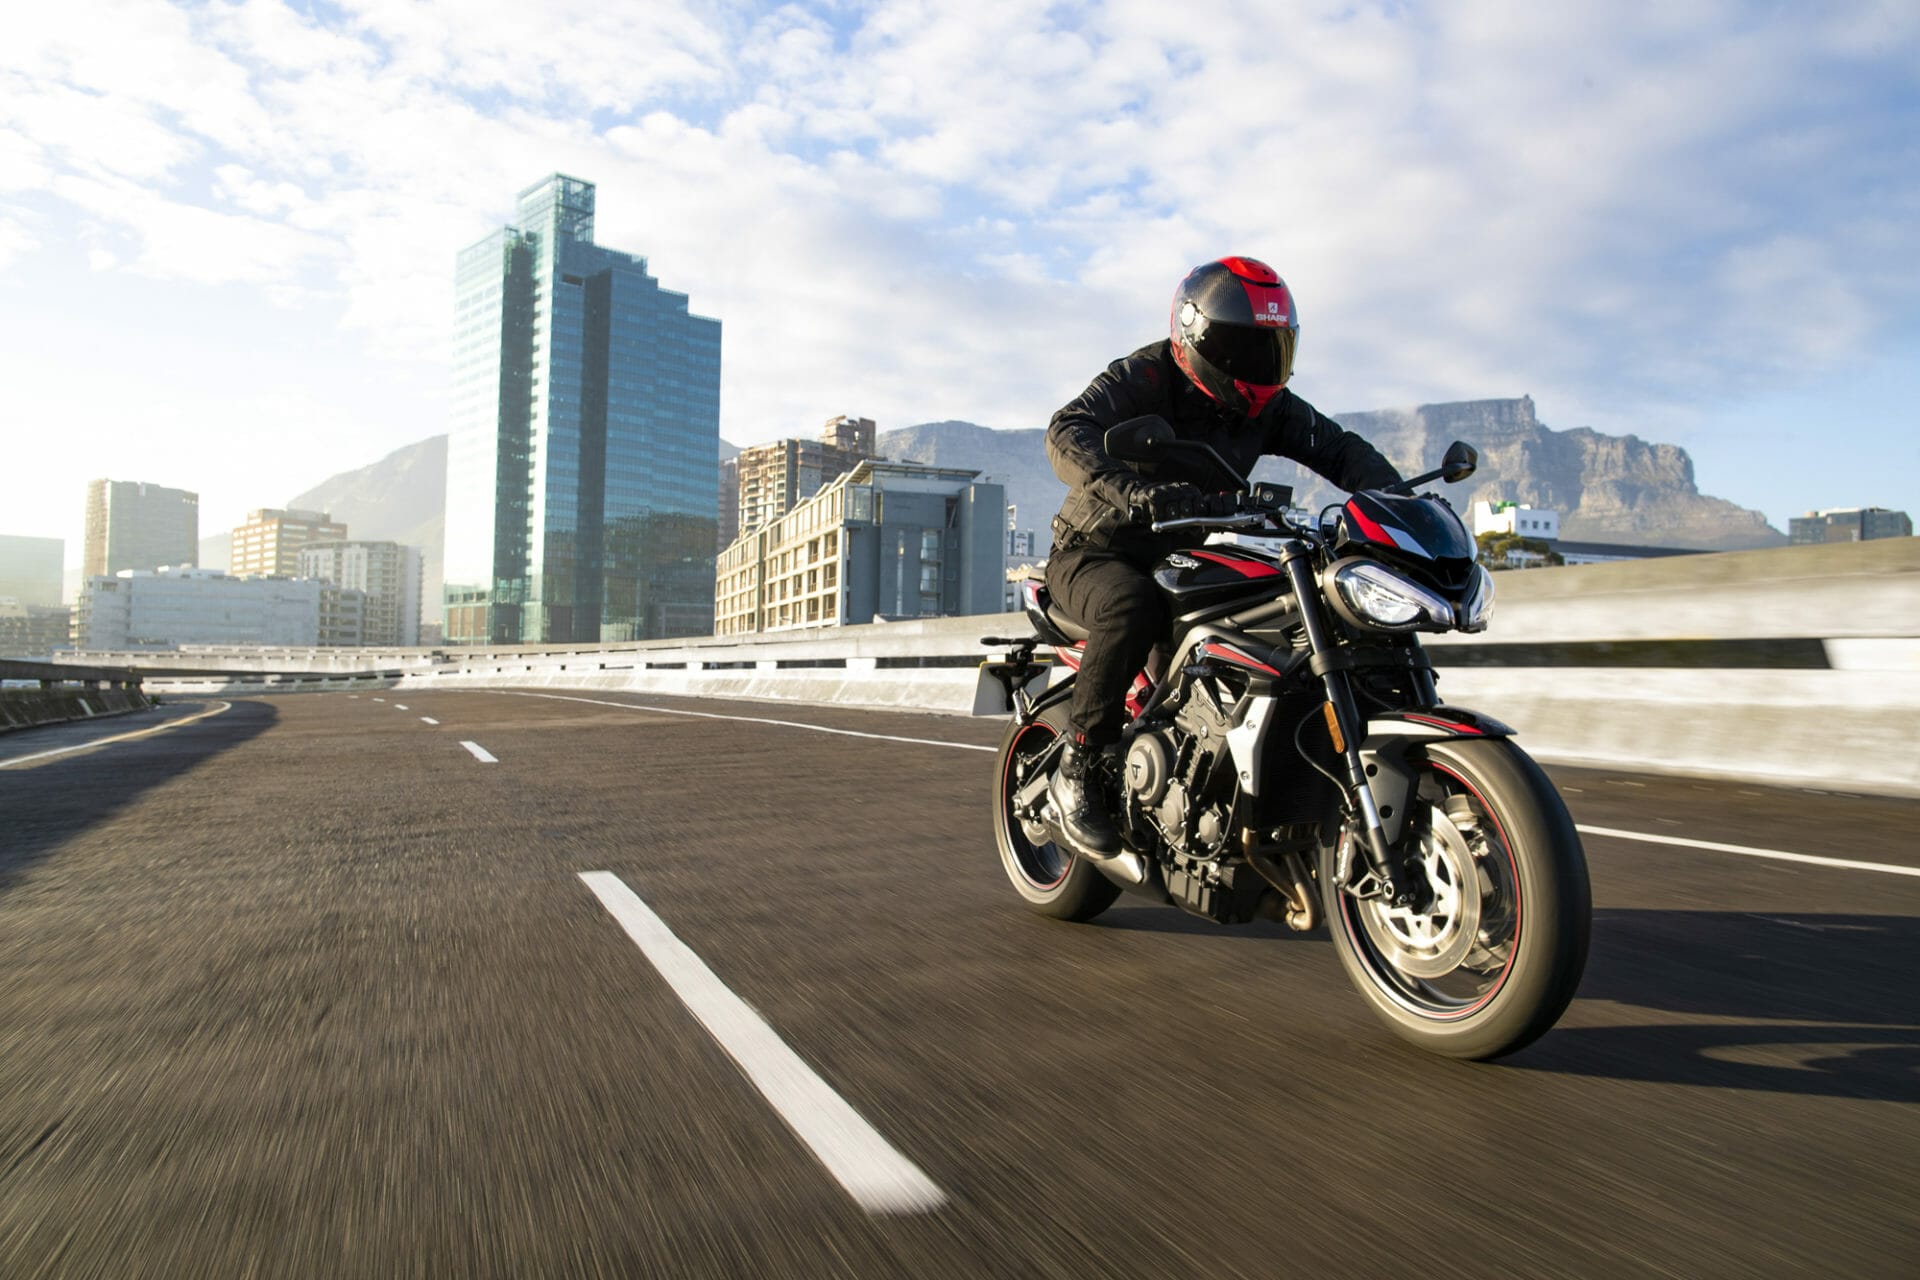 Triumph deletes "Street" from the range - MOTORCYCLES.NEWS